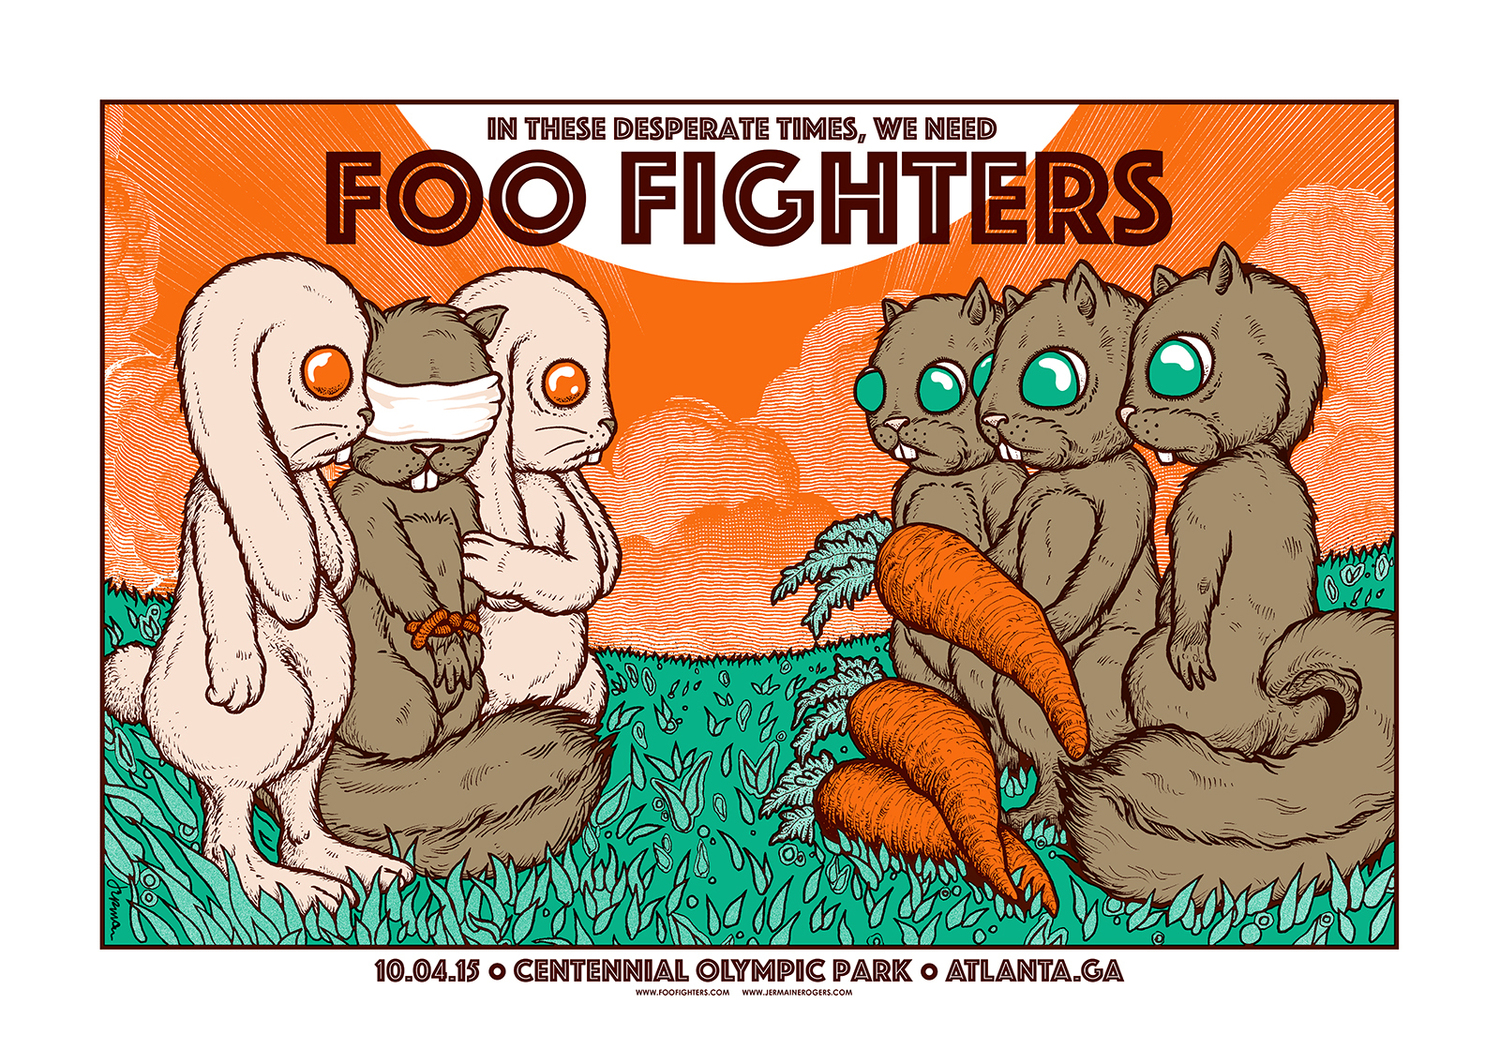 Jermaine Rogers - Foo Fighters Olypic Park, Atlanta 10.04.15 - Limited Concert Poster